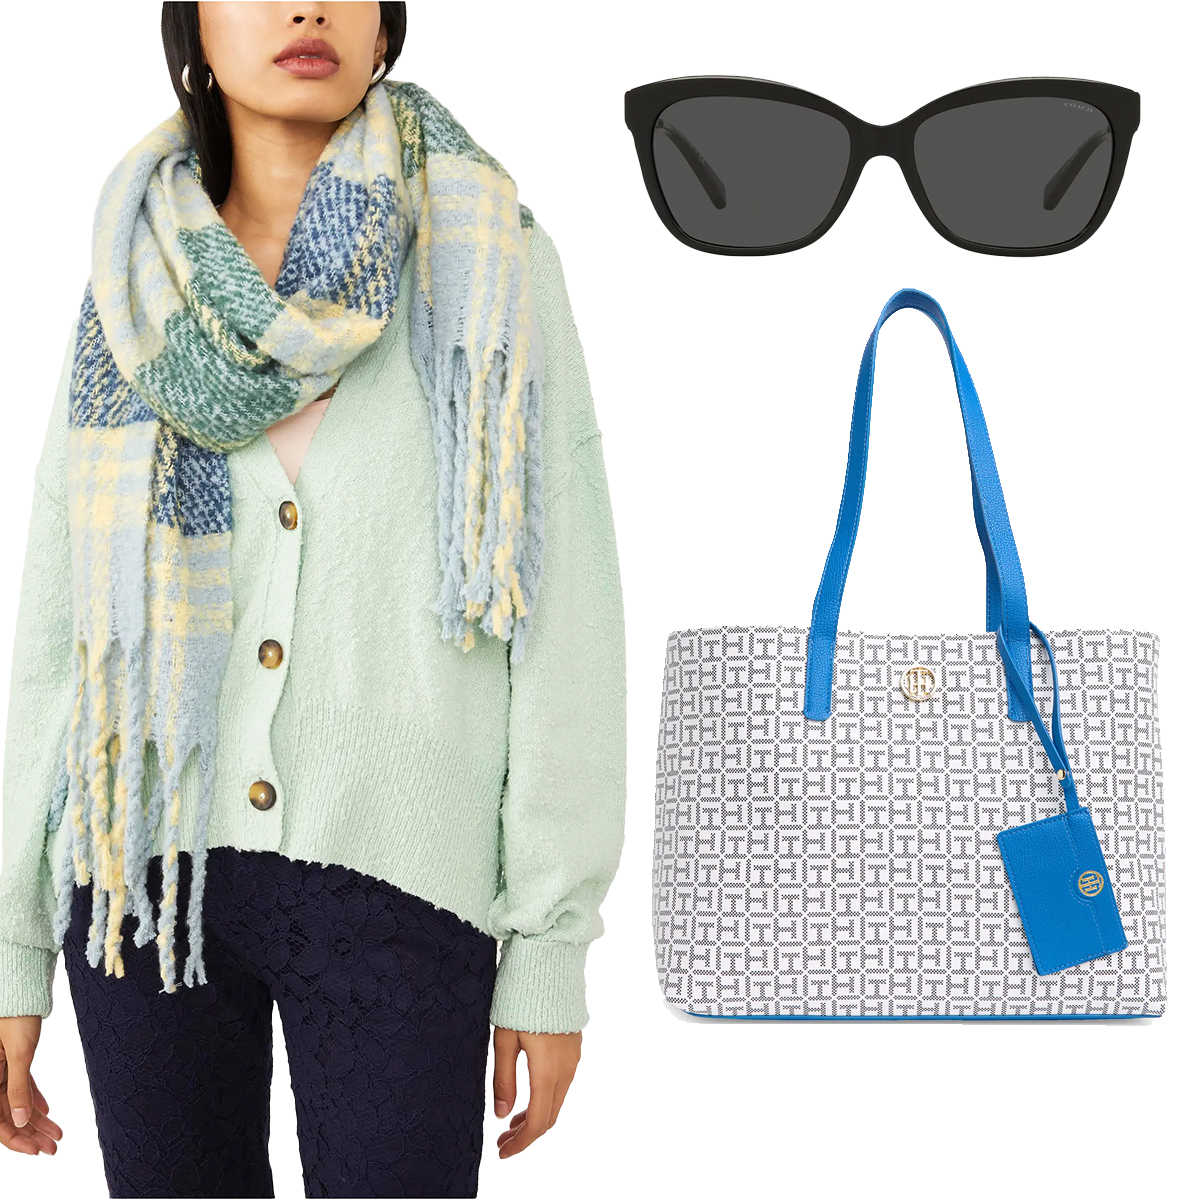 Shop Deals on Bags & Accessories at Nordstrom Clear The Rack Sale